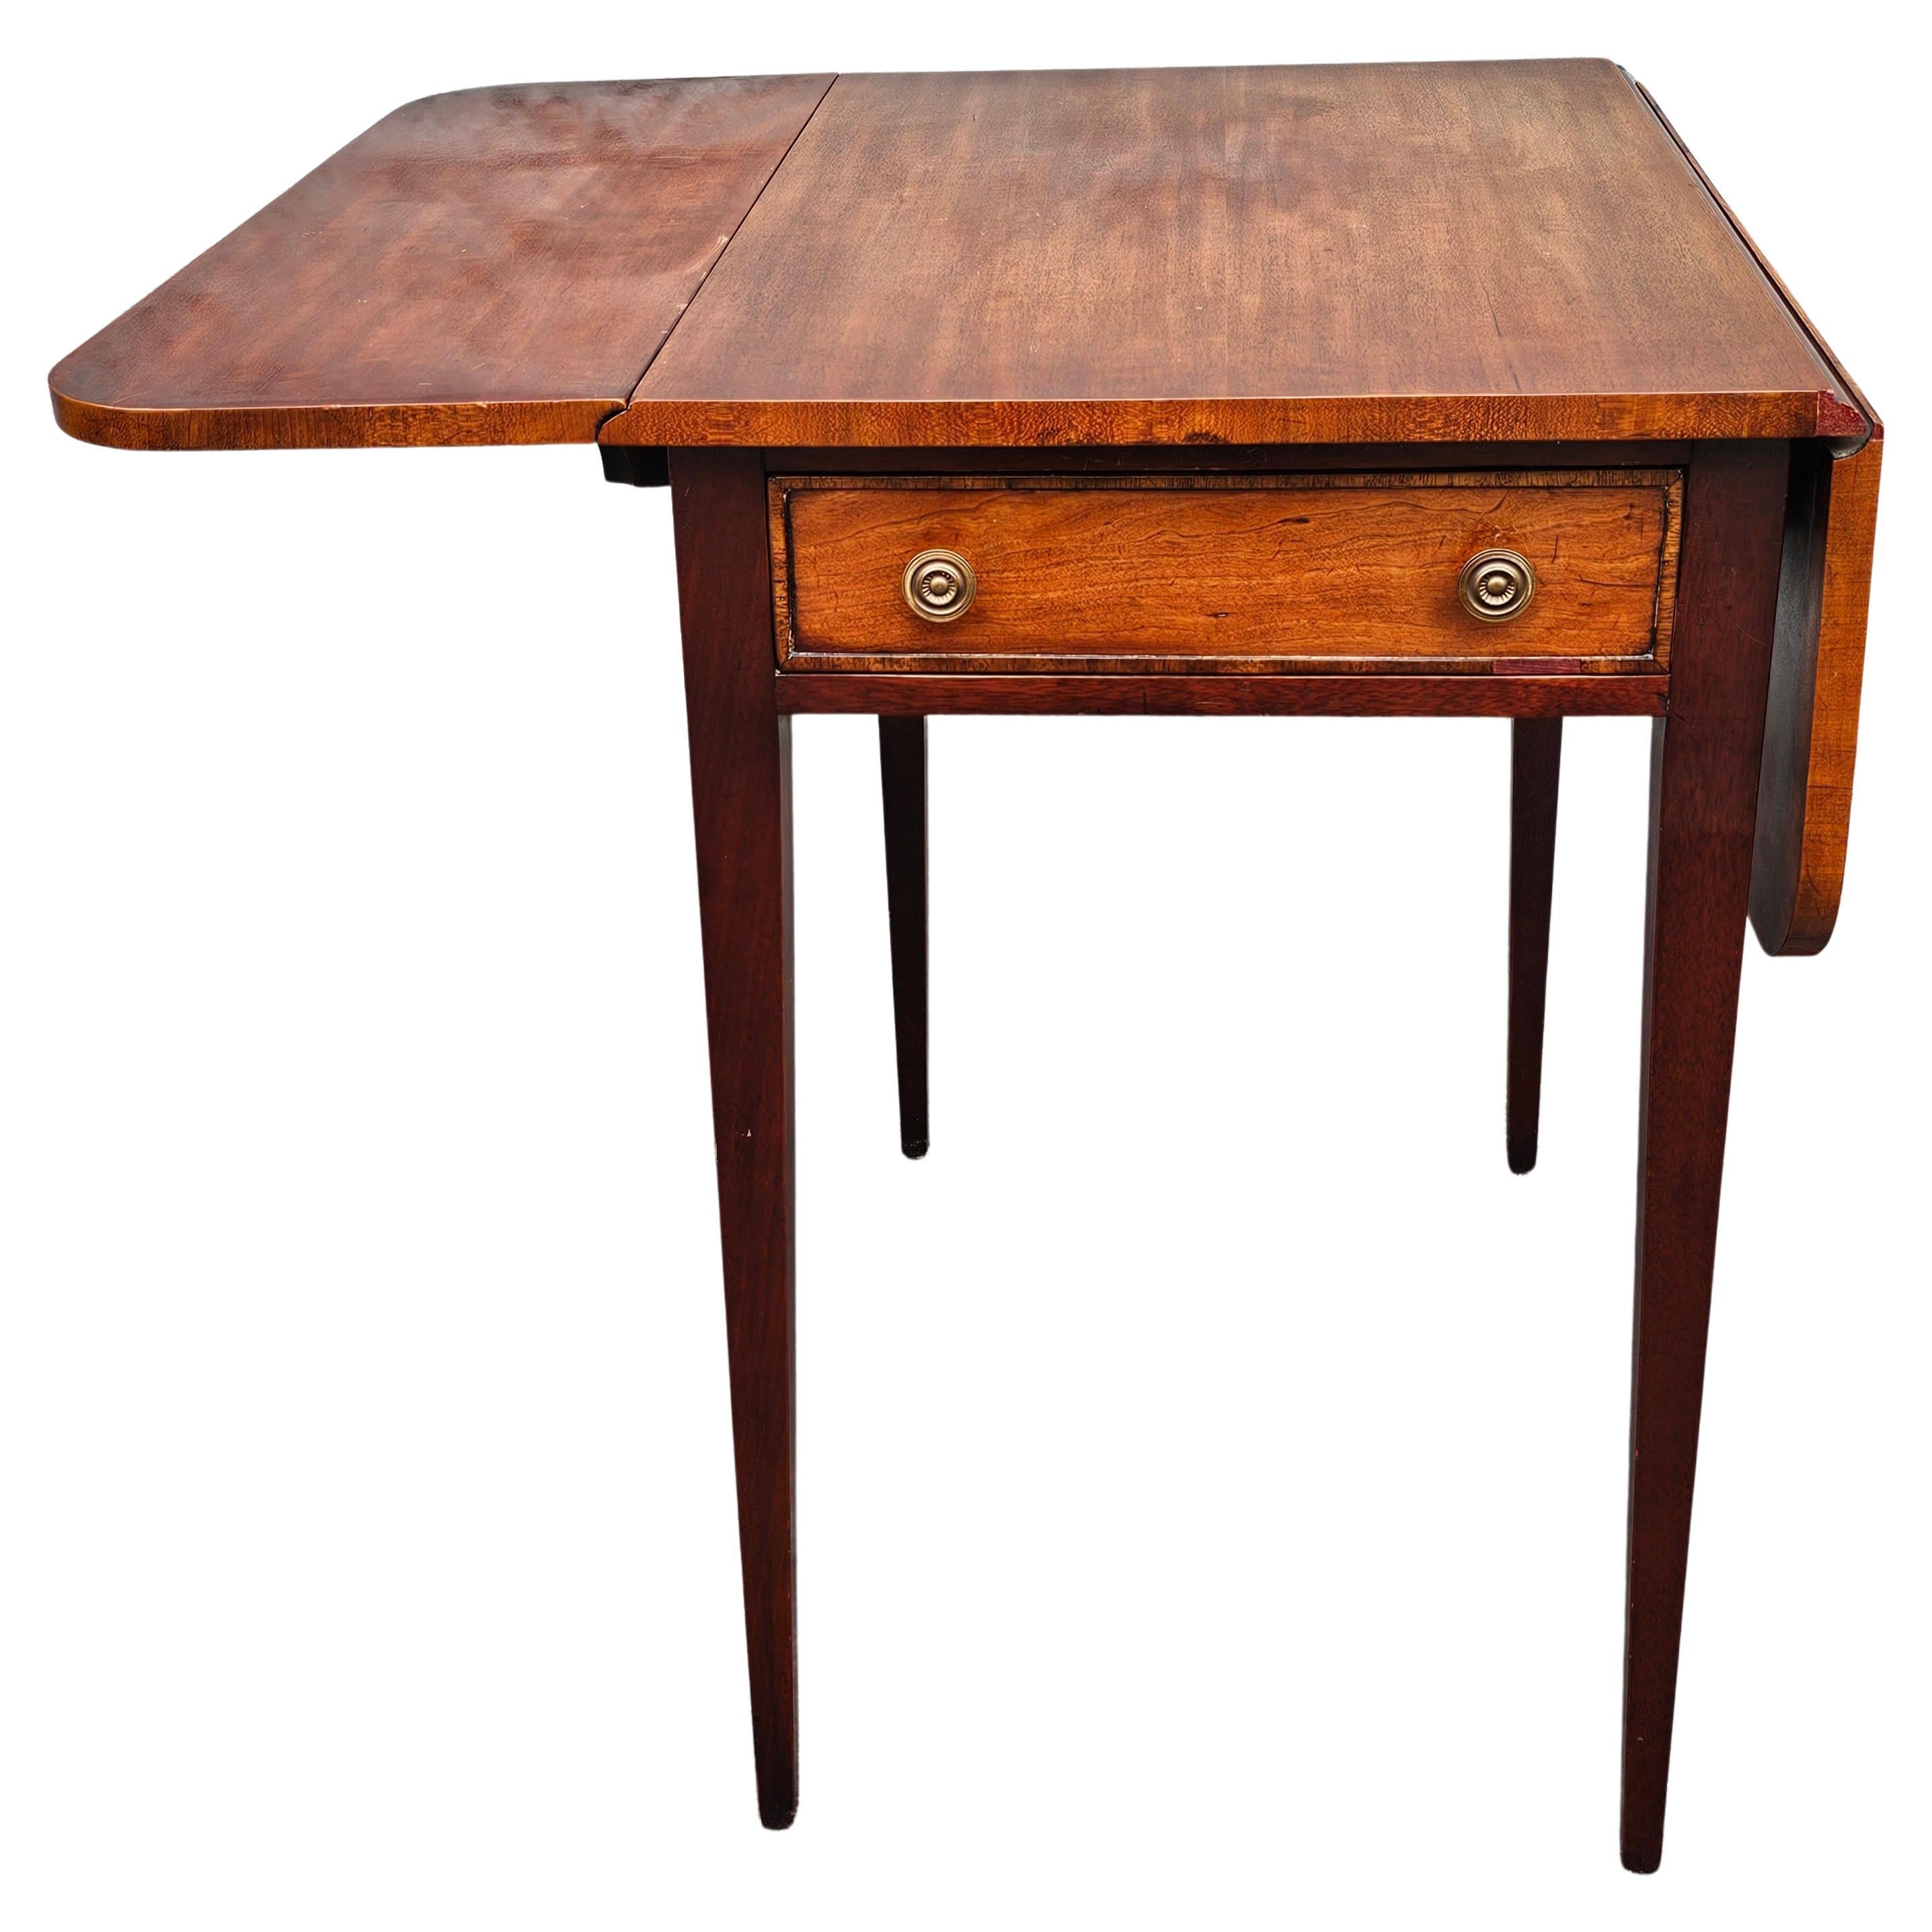 19th Century Federal Style Mahogany Pembroke Table For Sale 2